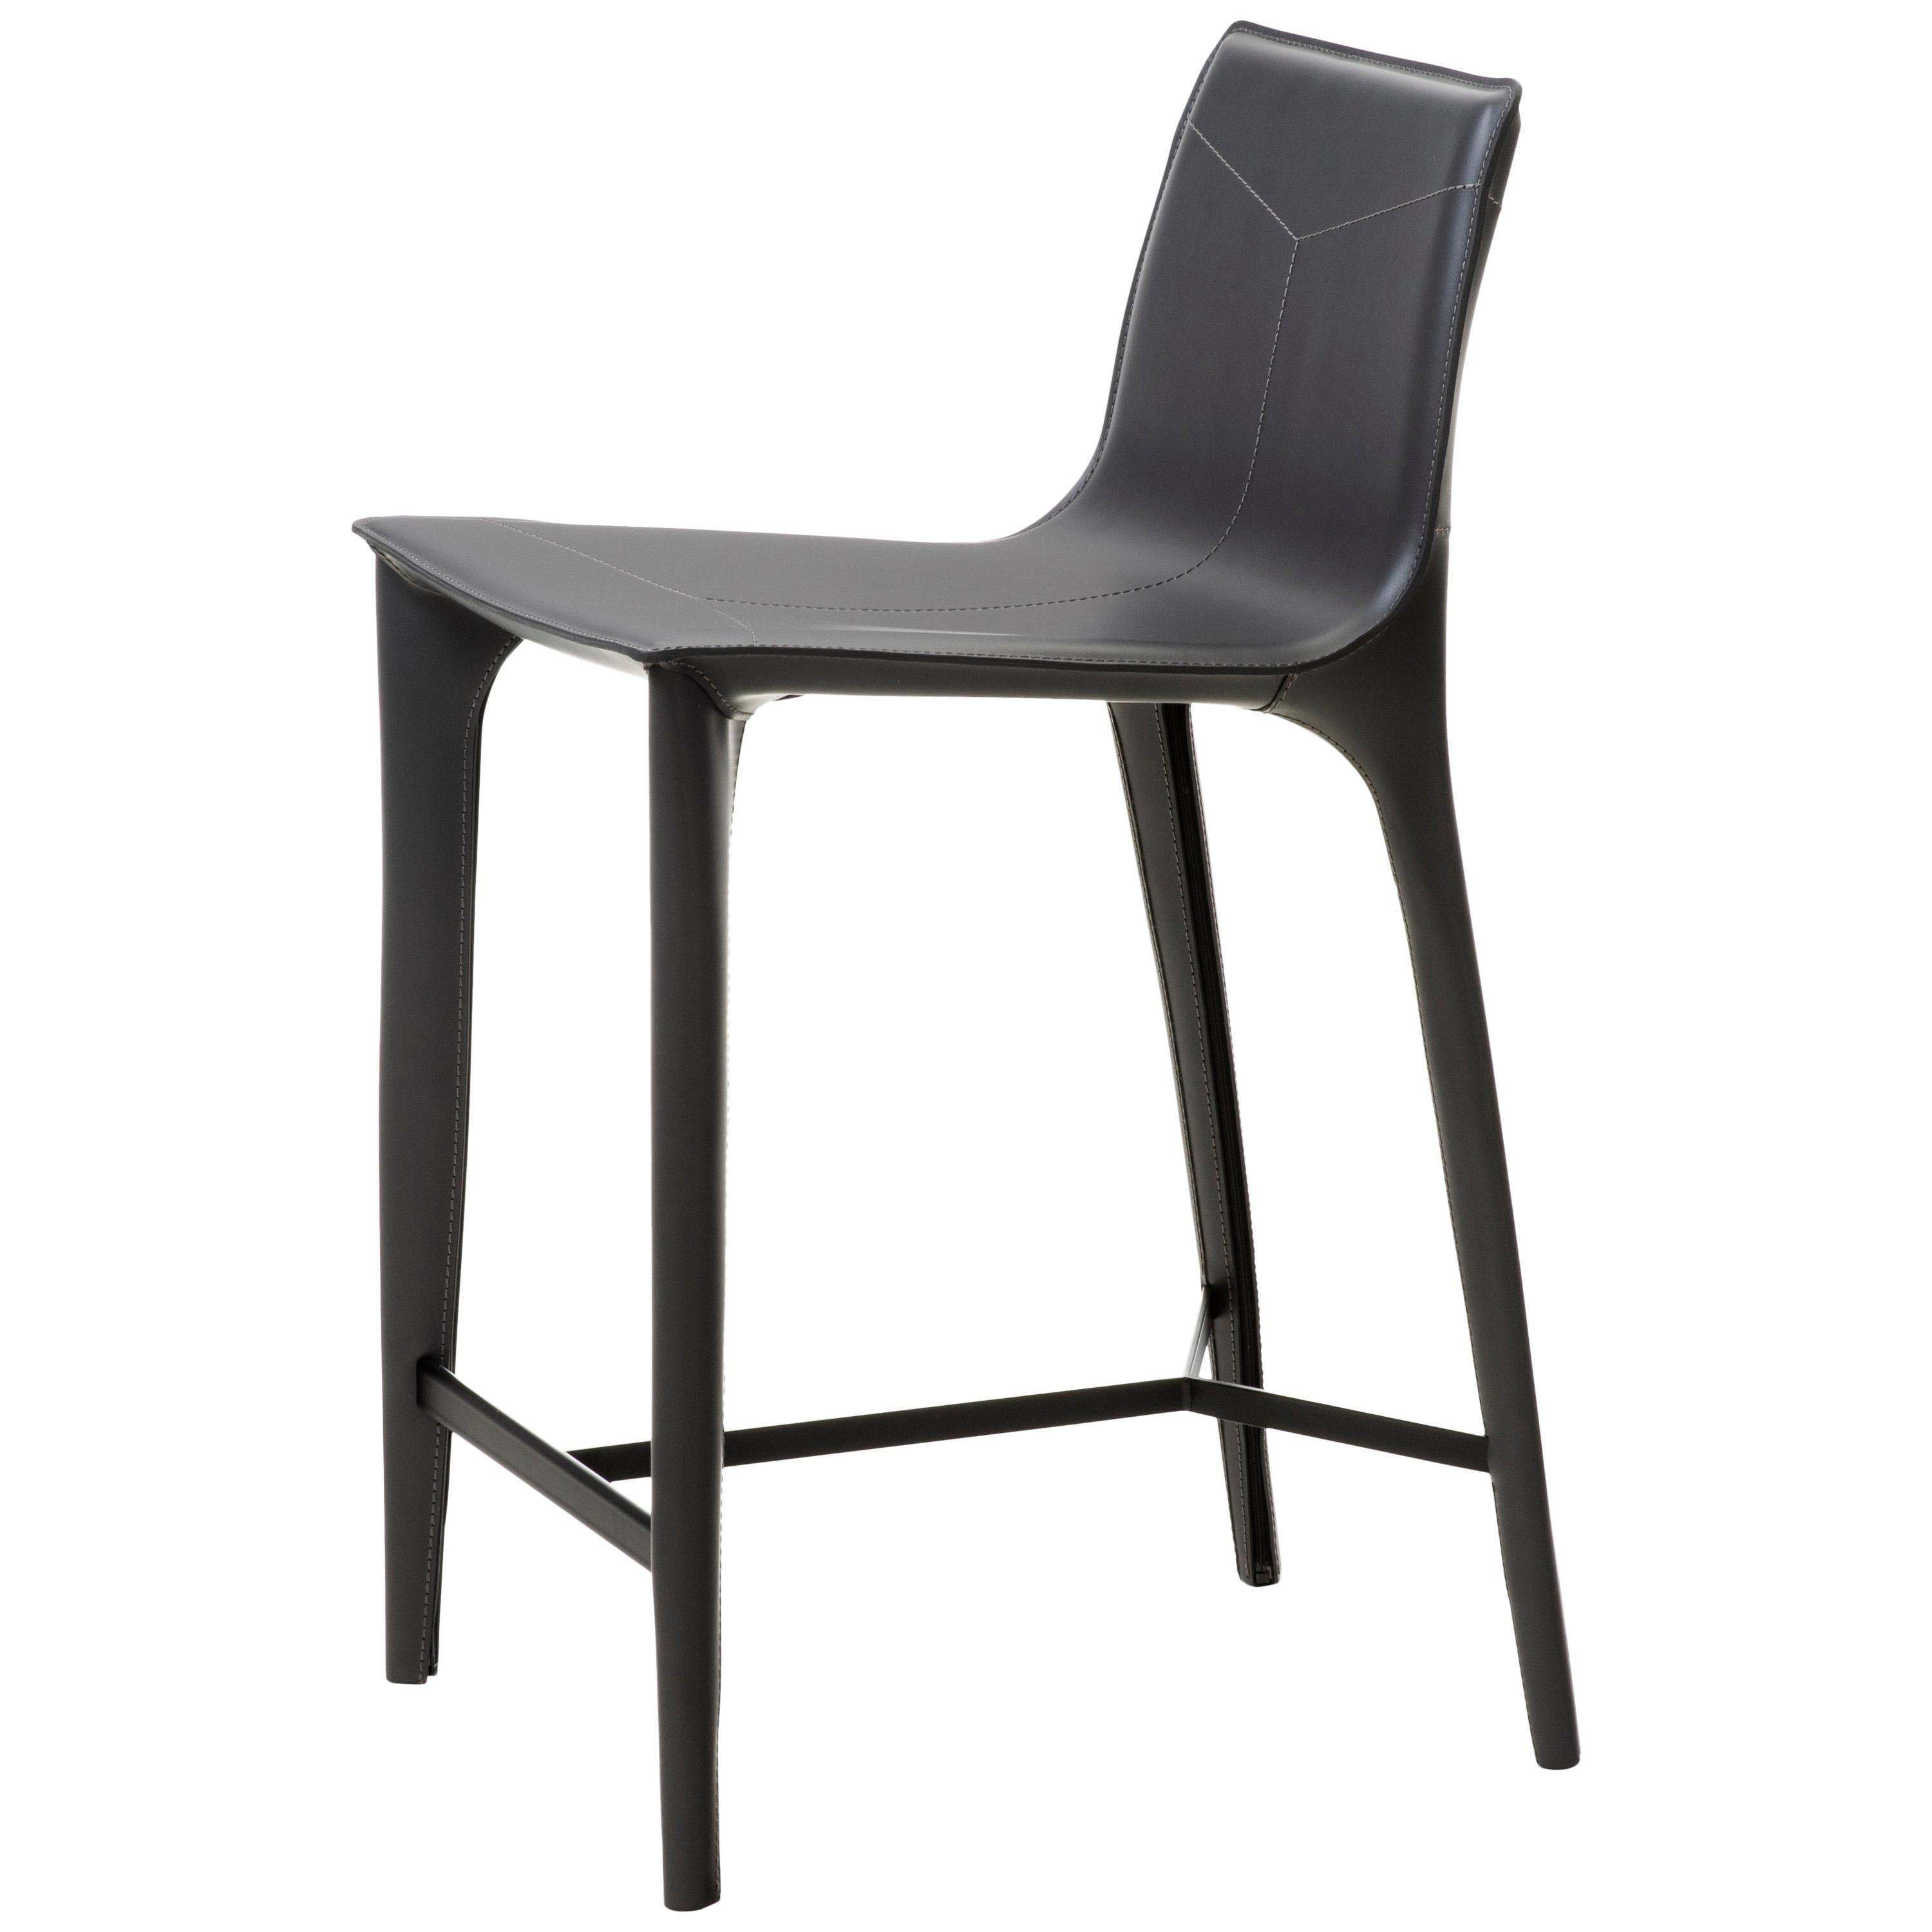 HOLLY HUNT Adriatic Counterstool in Matte Black and Dark Grey Leather